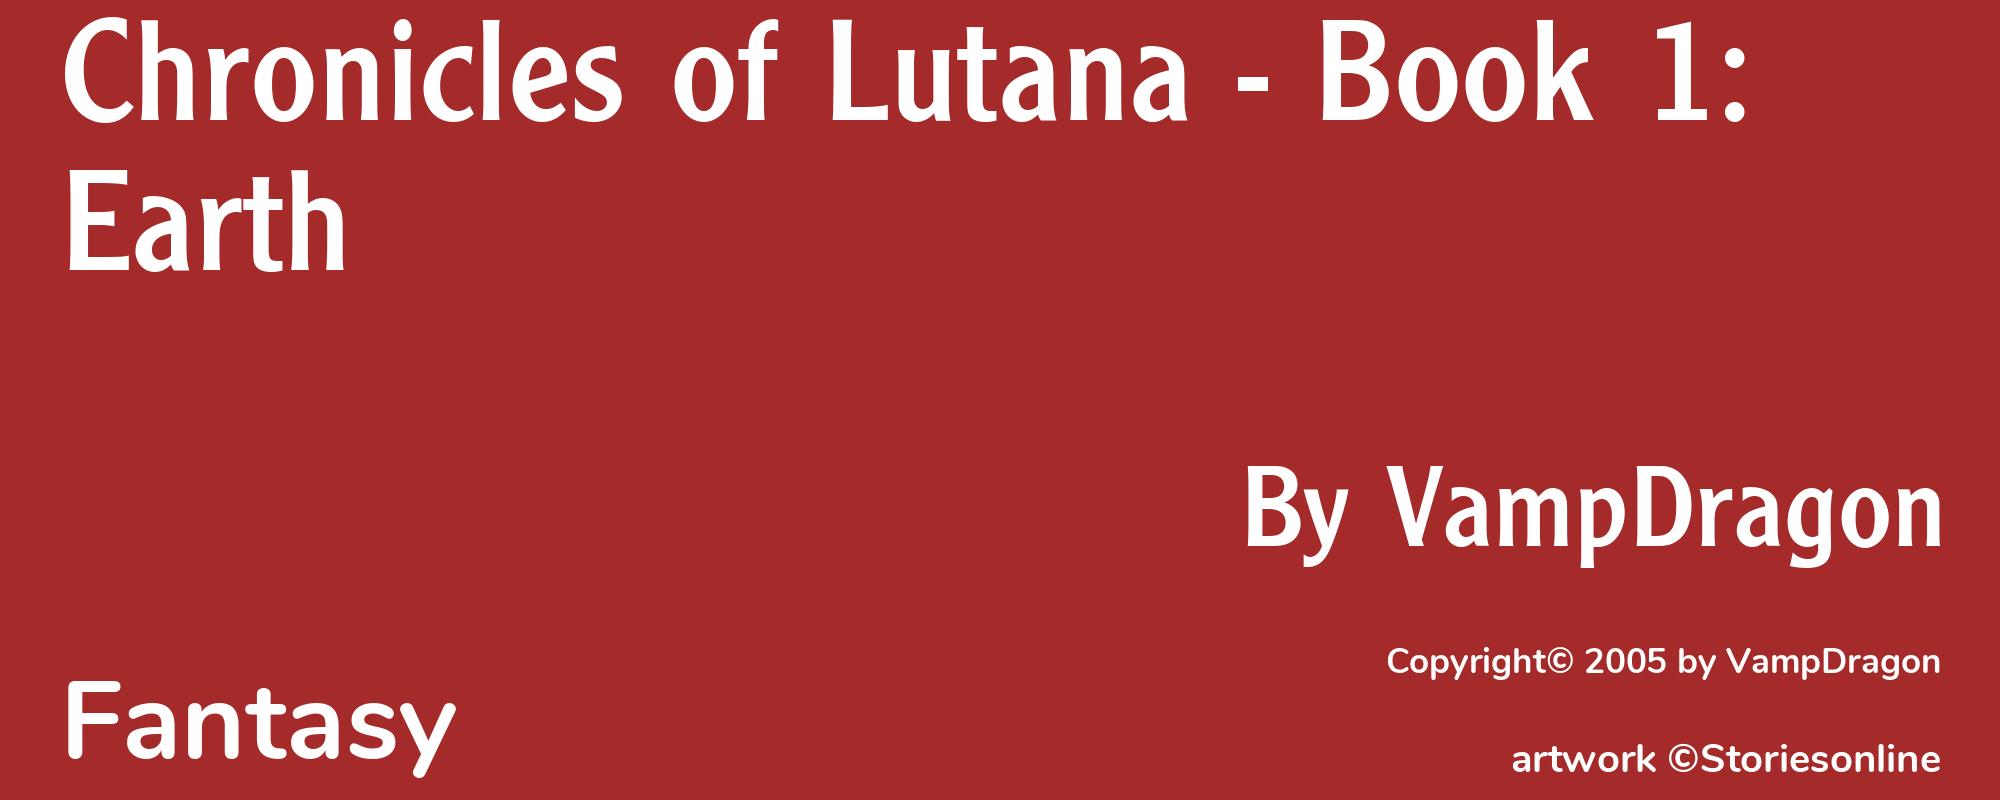 Chronicles of Lutana - Book 1: Earth - Cover